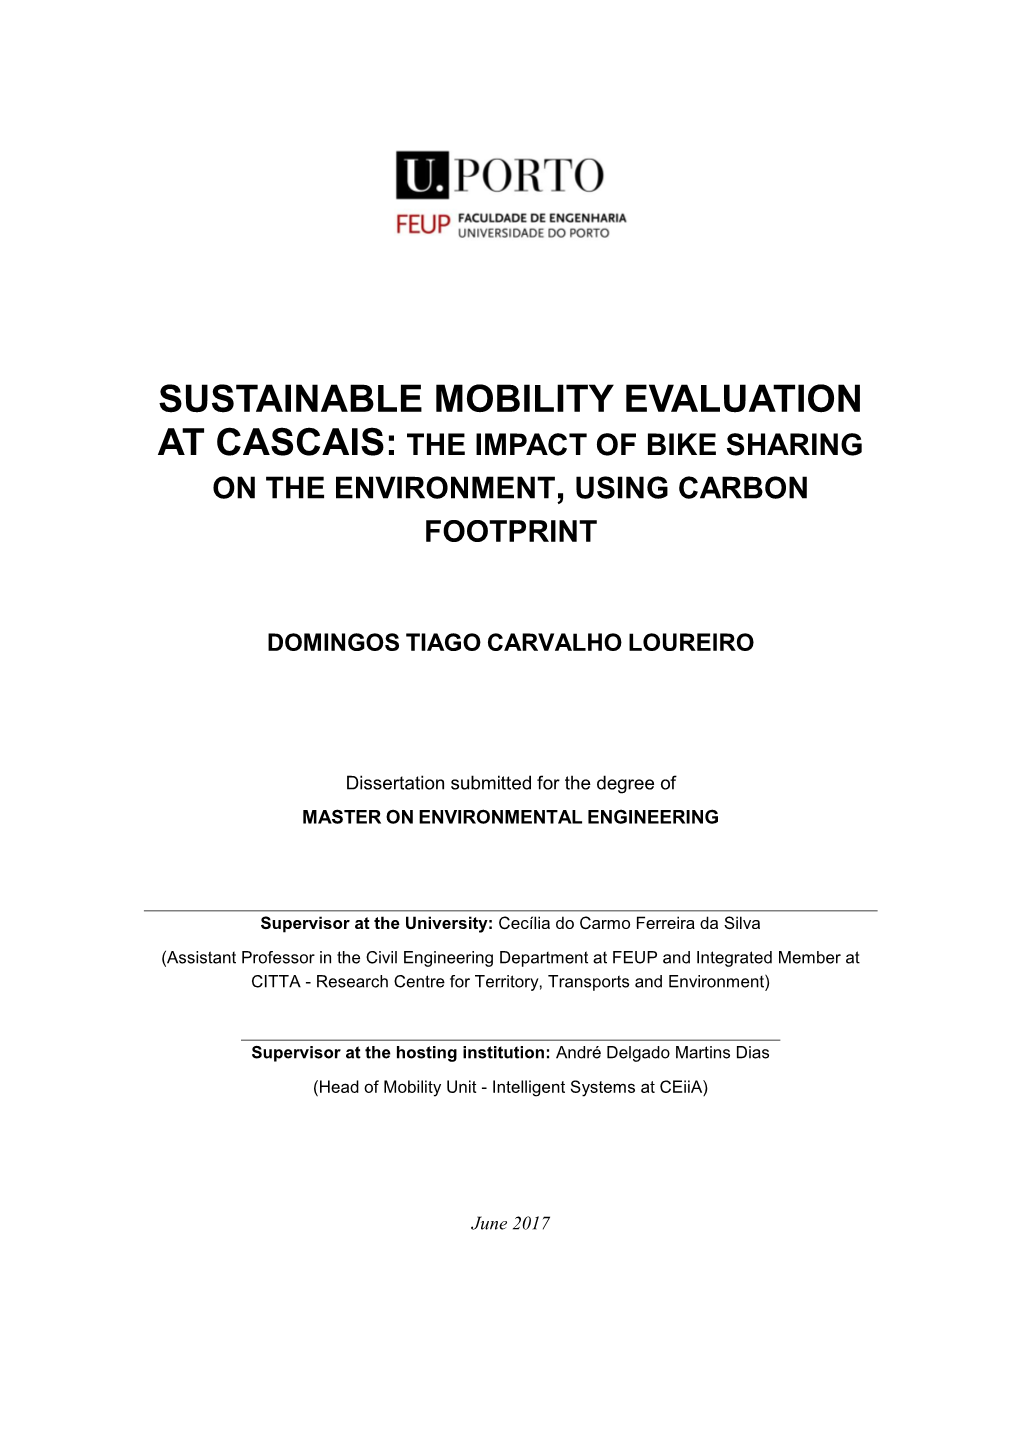 Sustainable Mobility Evaluation at Cascais: the Impact of Bike Sharing on the Environment, Using Carbon Footprint